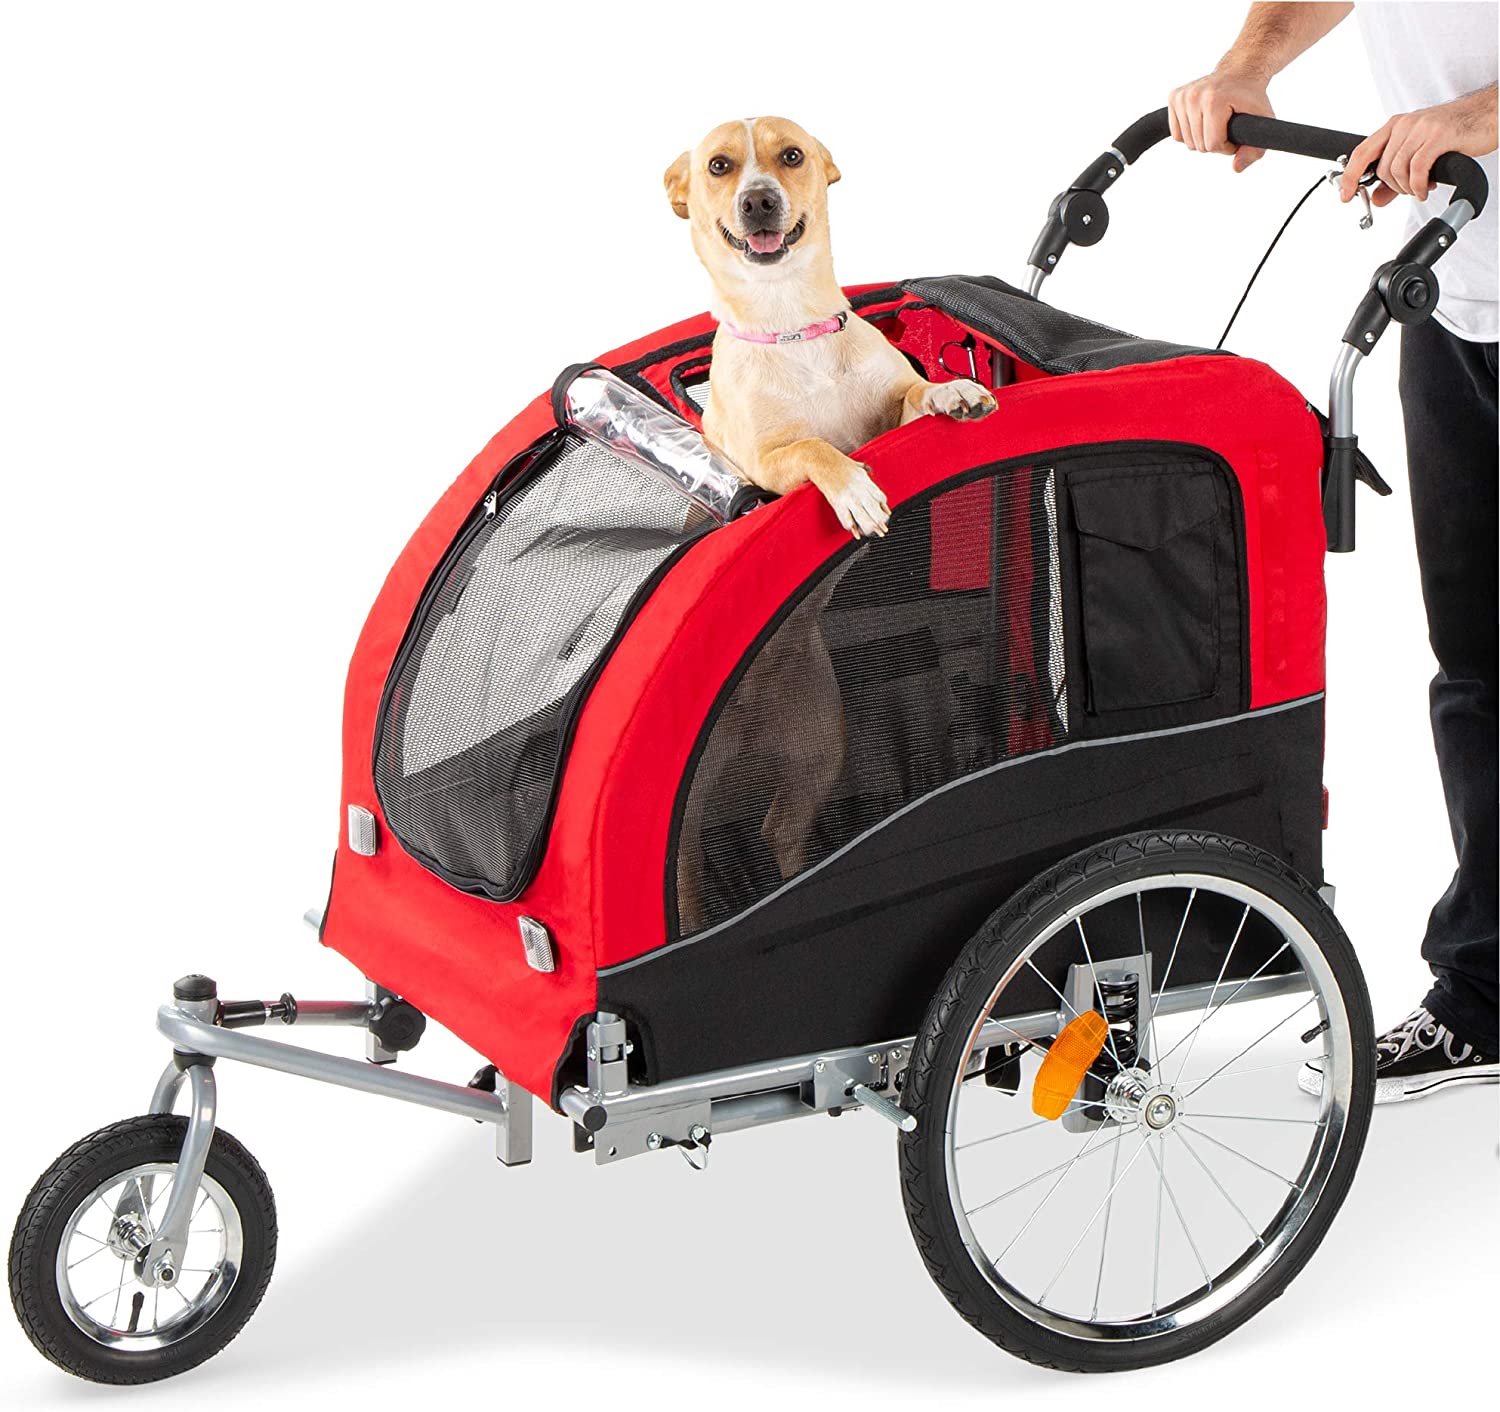 Dog Carrier For Bikes The 10 Best Carriers Dogs To Ride Along In